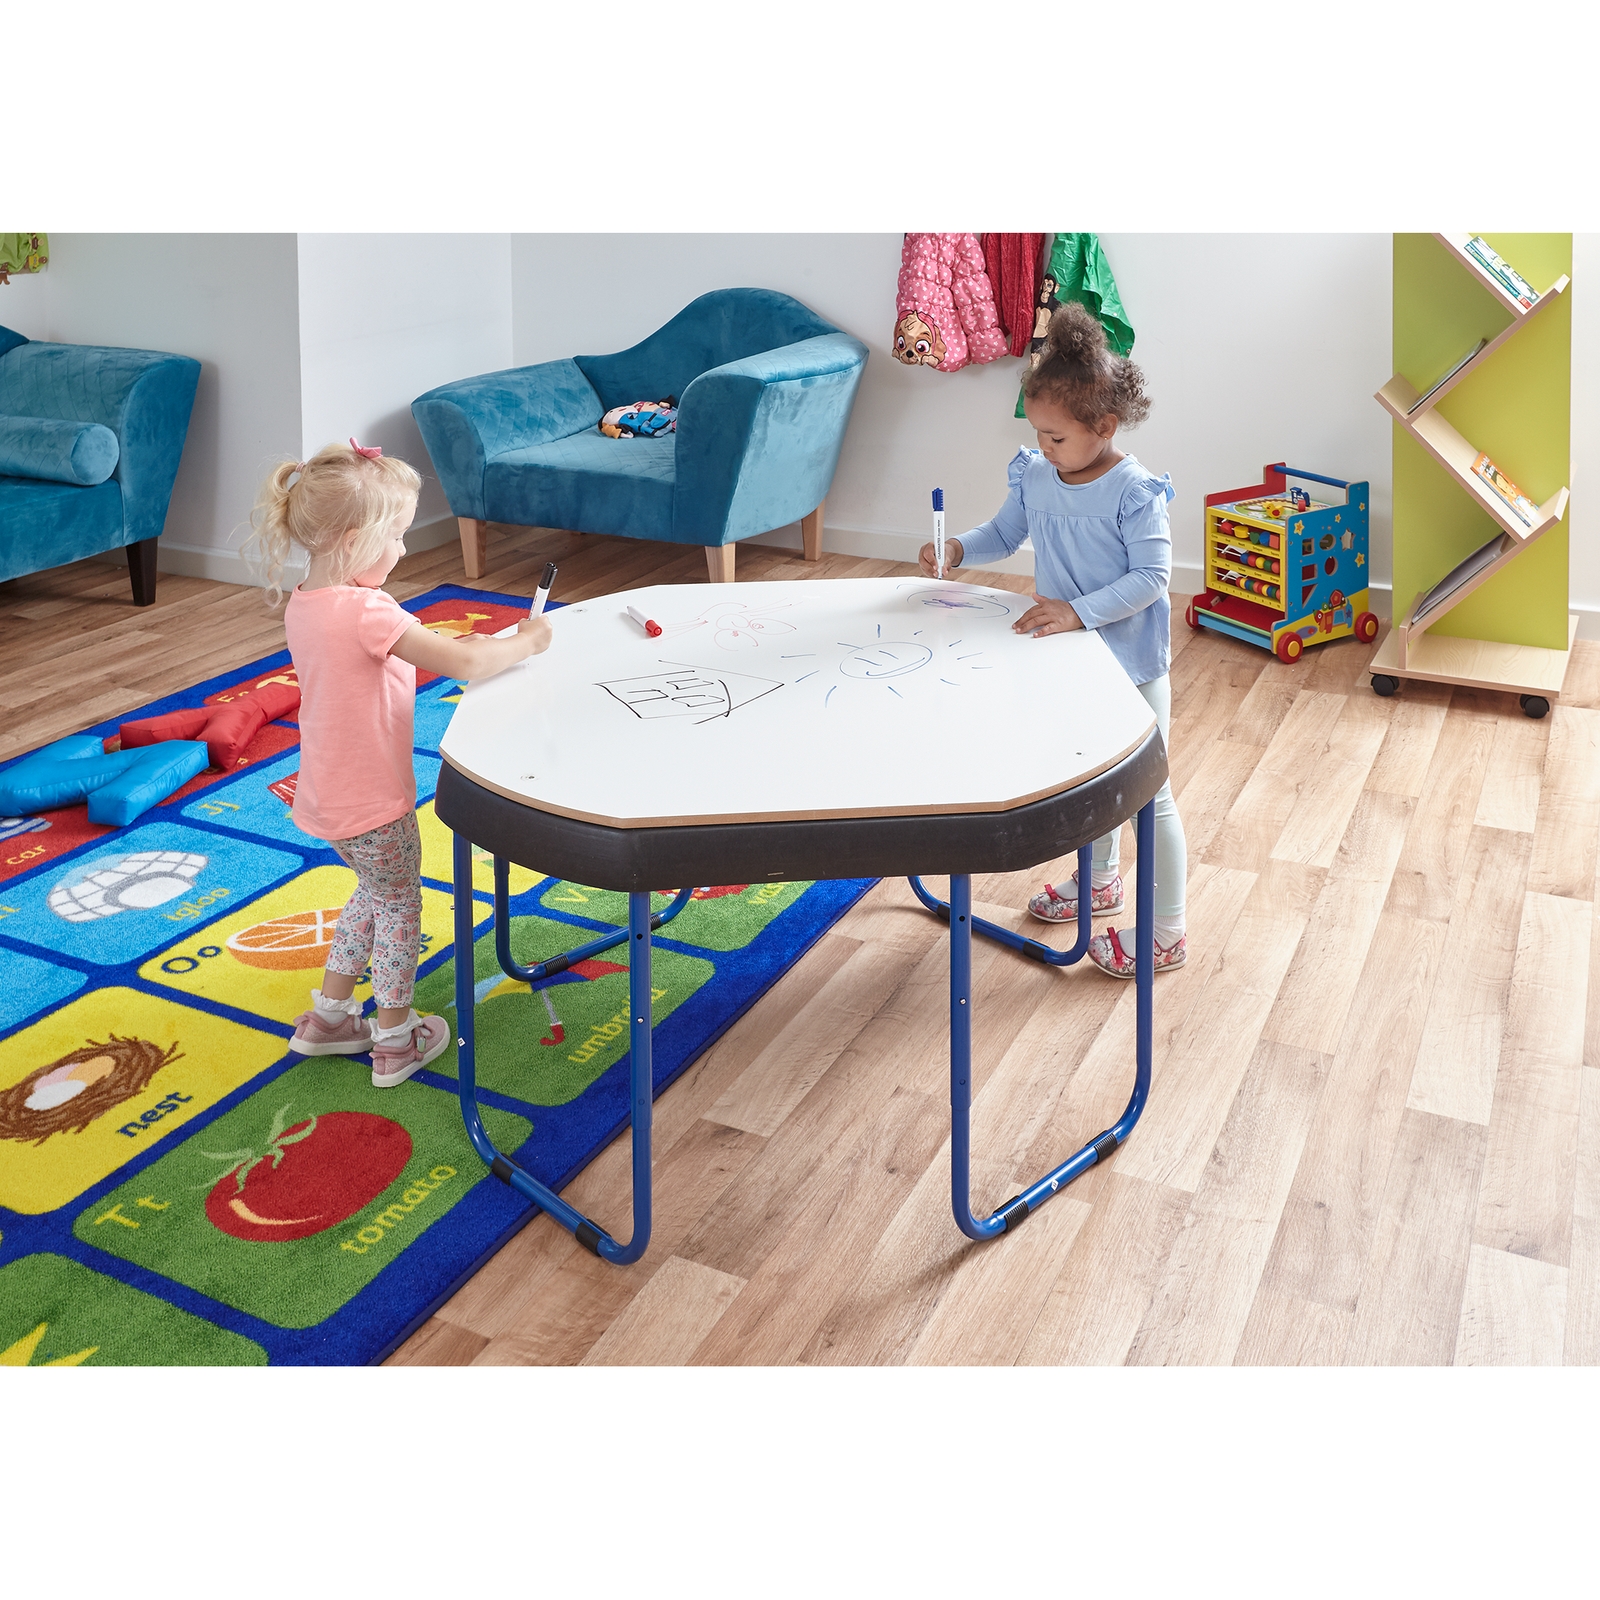 Reversible Play Tray Top